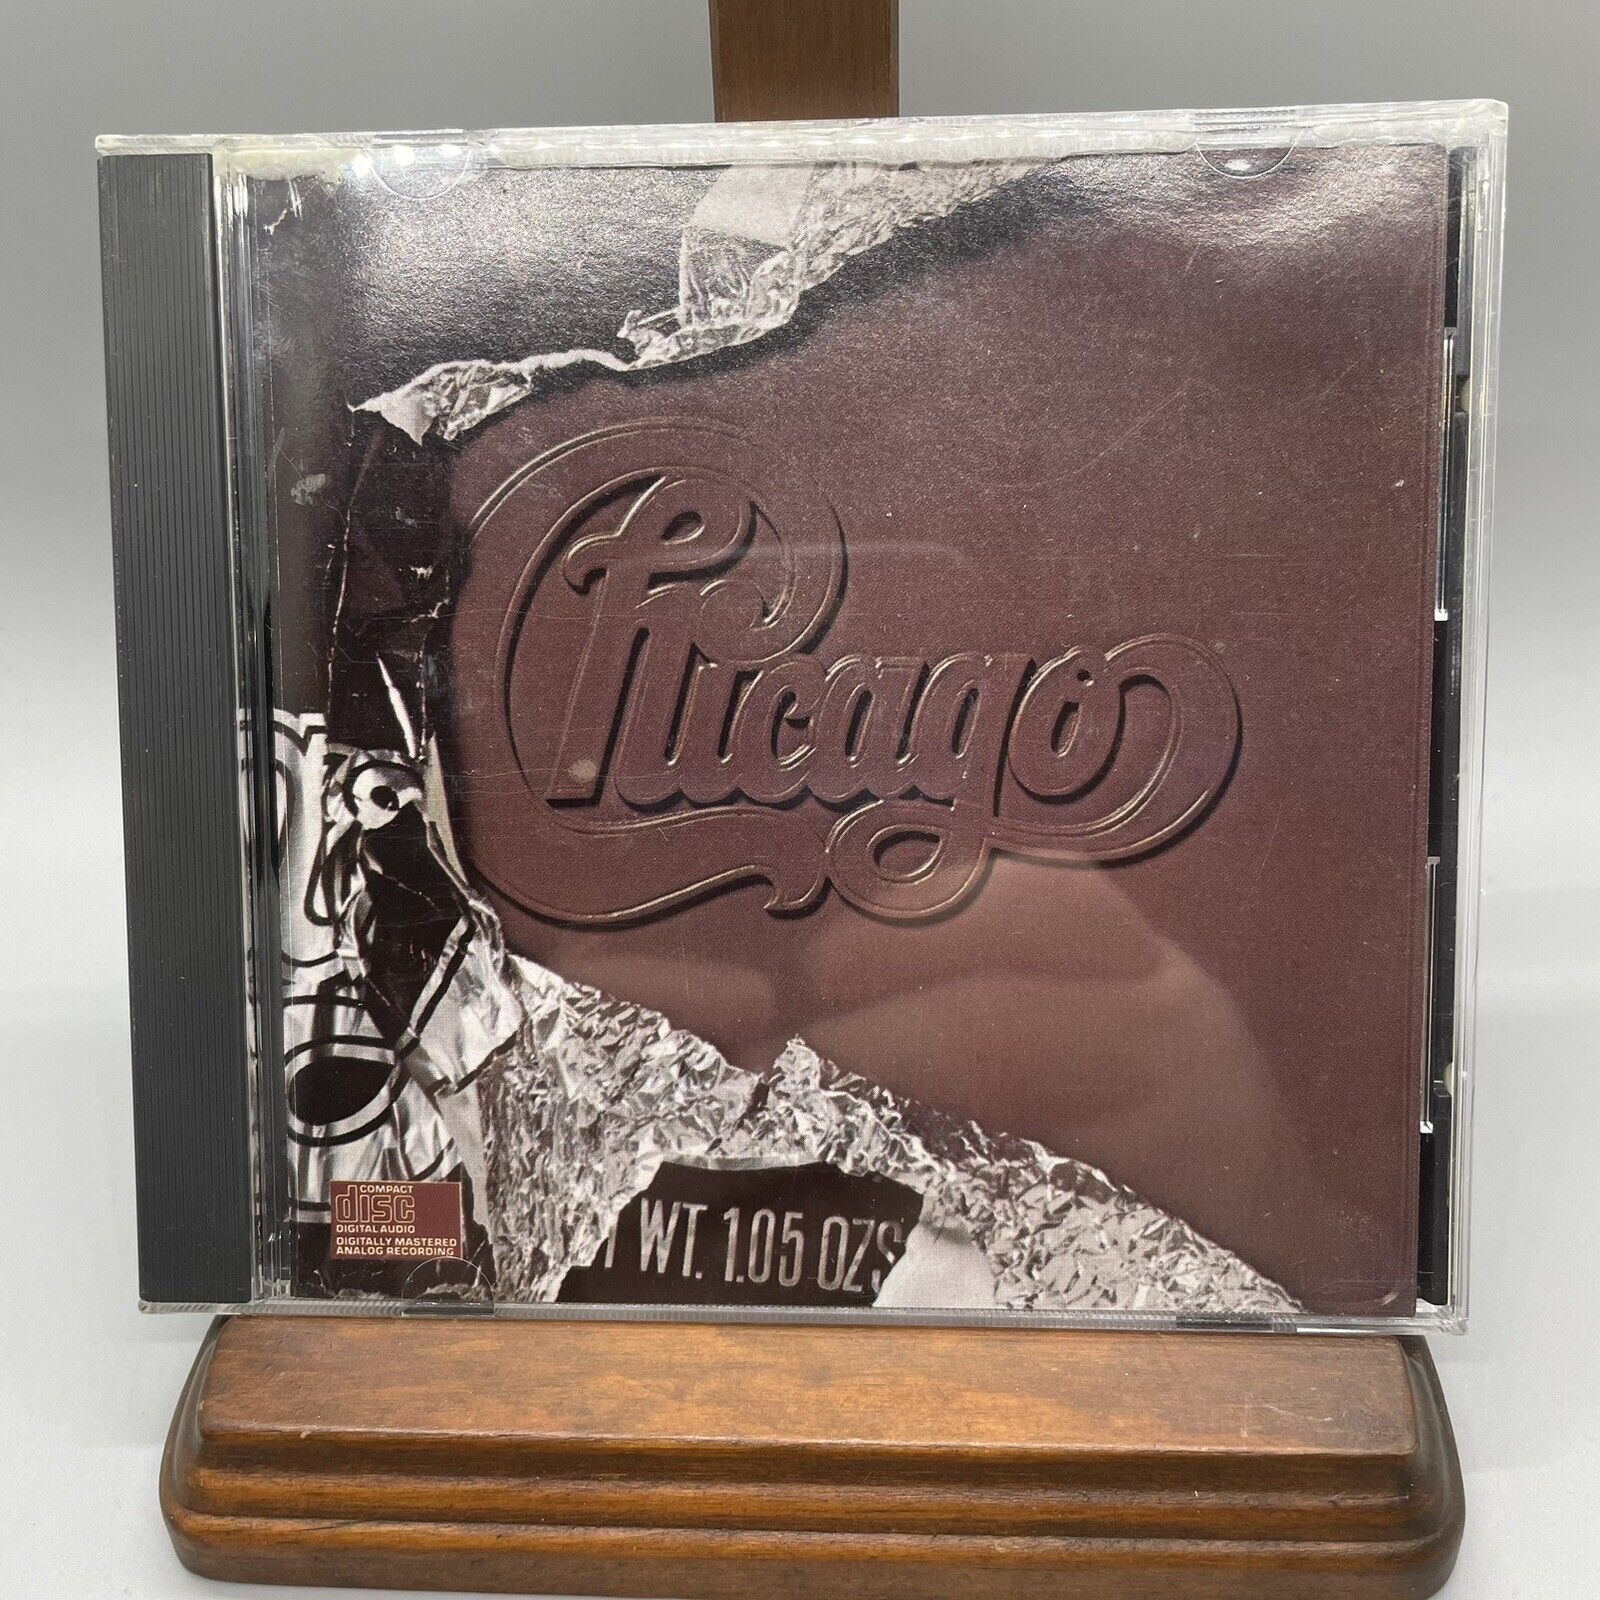 Chicago X 1976 Pre-owned CD Early Press Columbia CK 34200 DIDP 070258